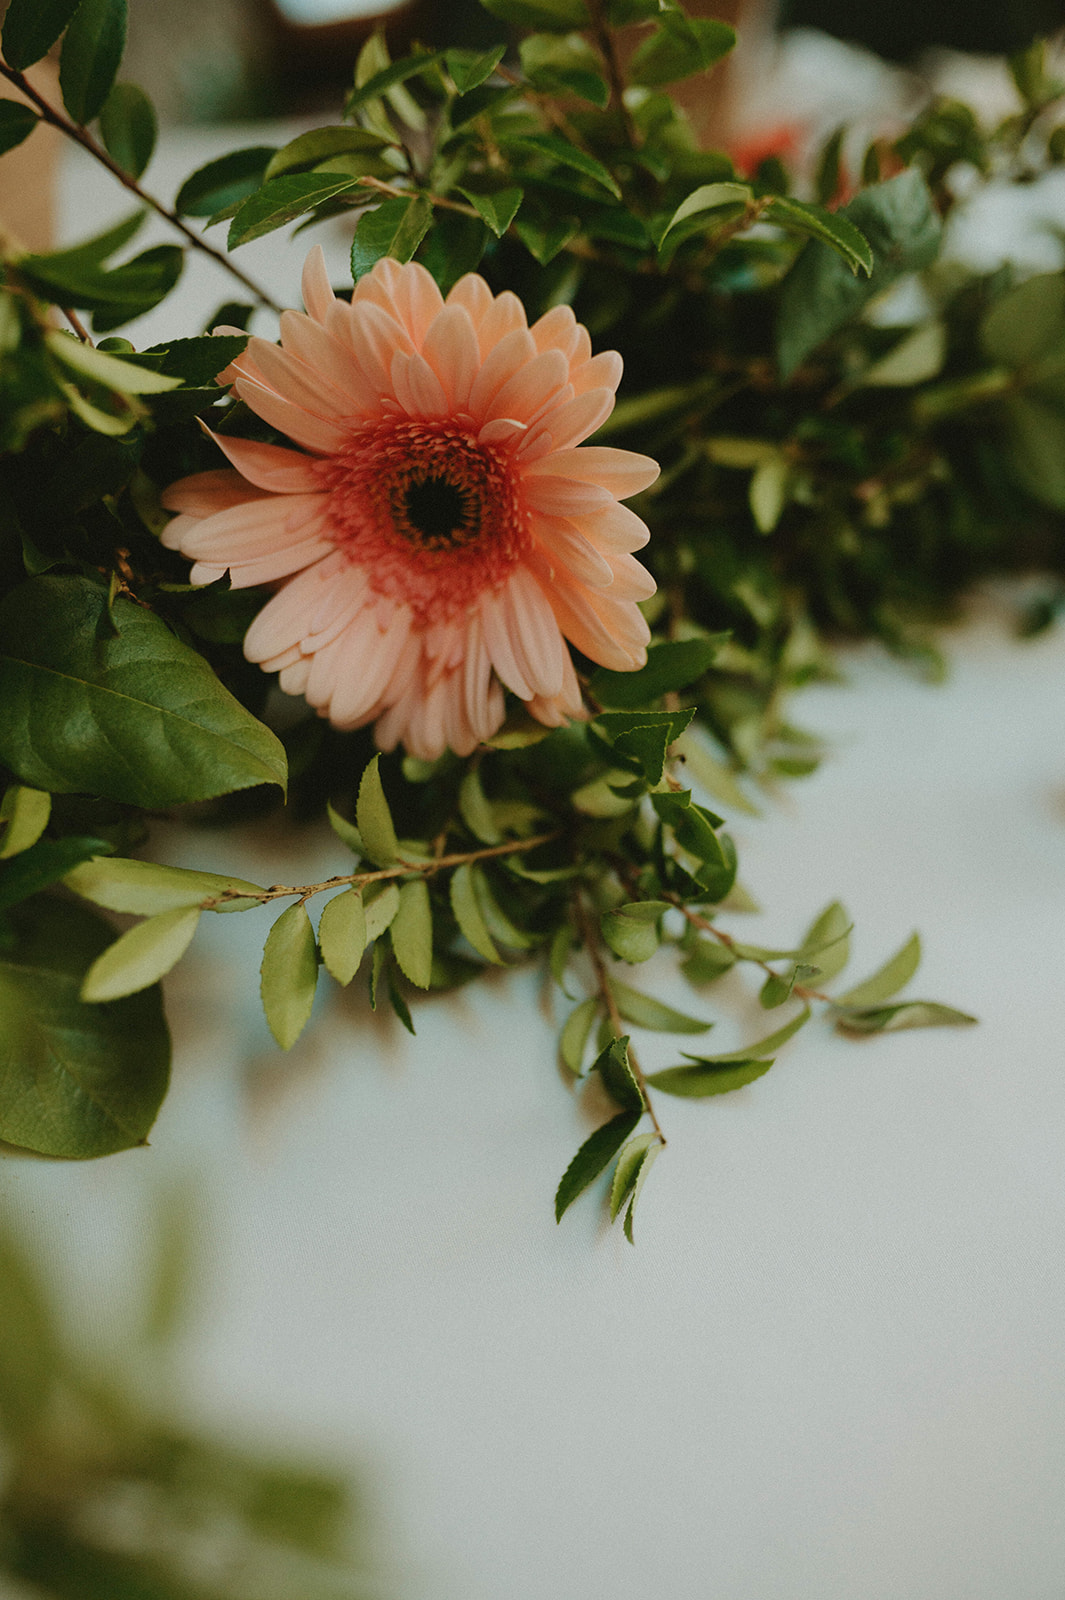 This Minimalist Micro-Wedding features a DIY Bouquet Made by the Bride Herself - gerber daisy, greenery